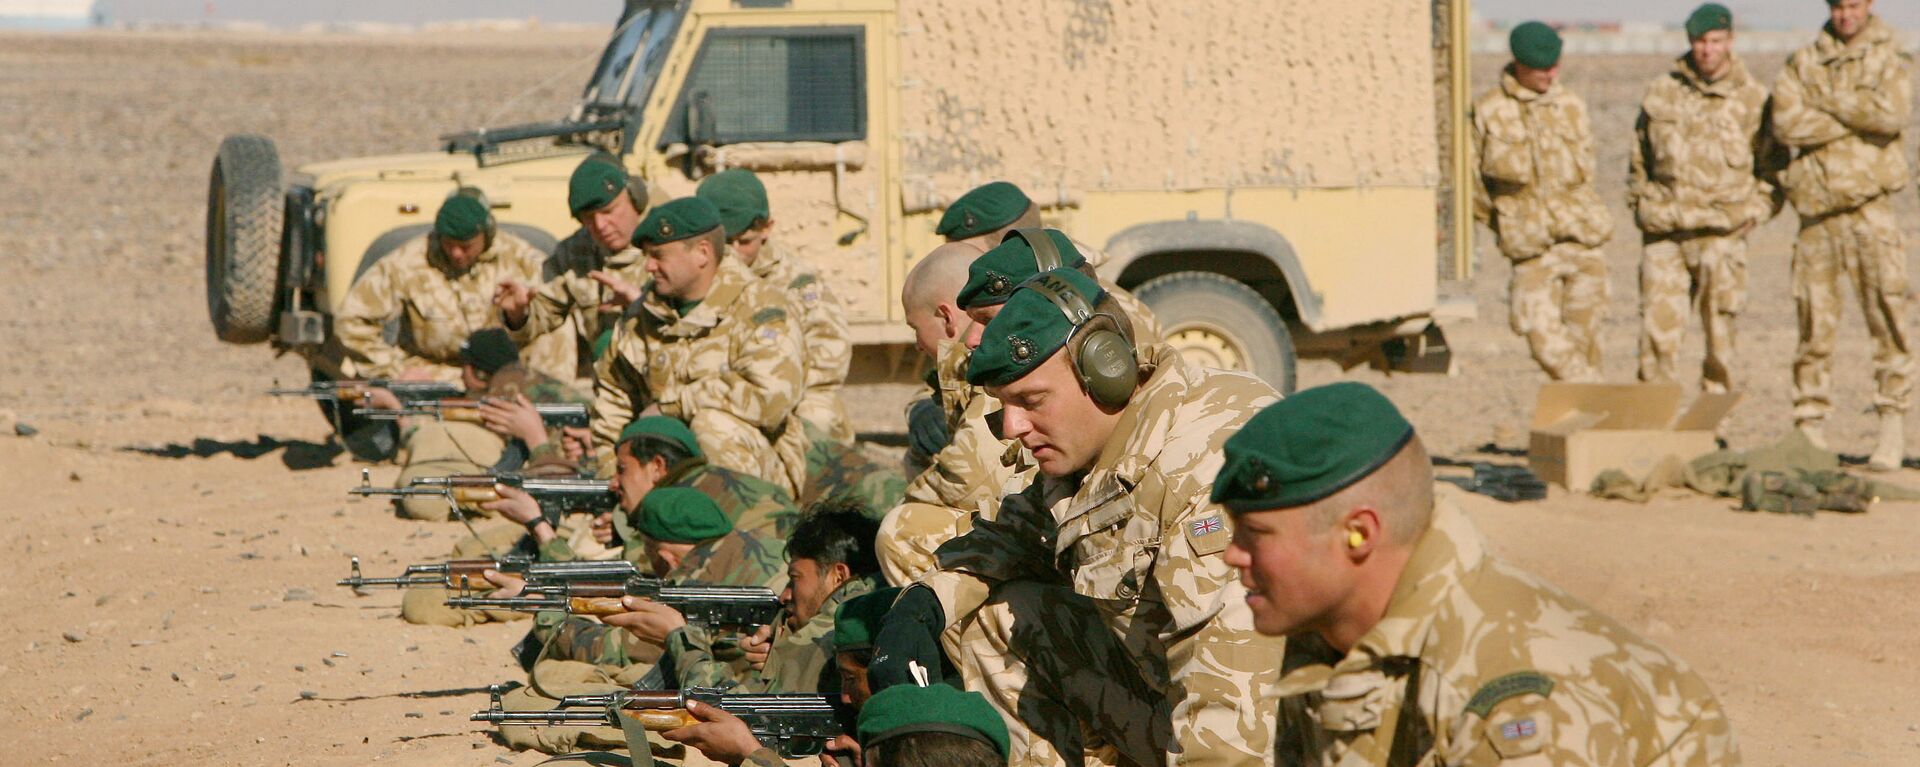 British Army officers from Operational Mentoring Liaison Training (OMLT) company train Afghan National Army or ANA, soldiers in firearms, near Camp Bastion, southern Afghanistan, Tuesday, Jan. 16, 2007 - اسپوتنیک افغانستان  , 1920, 09.11.2022